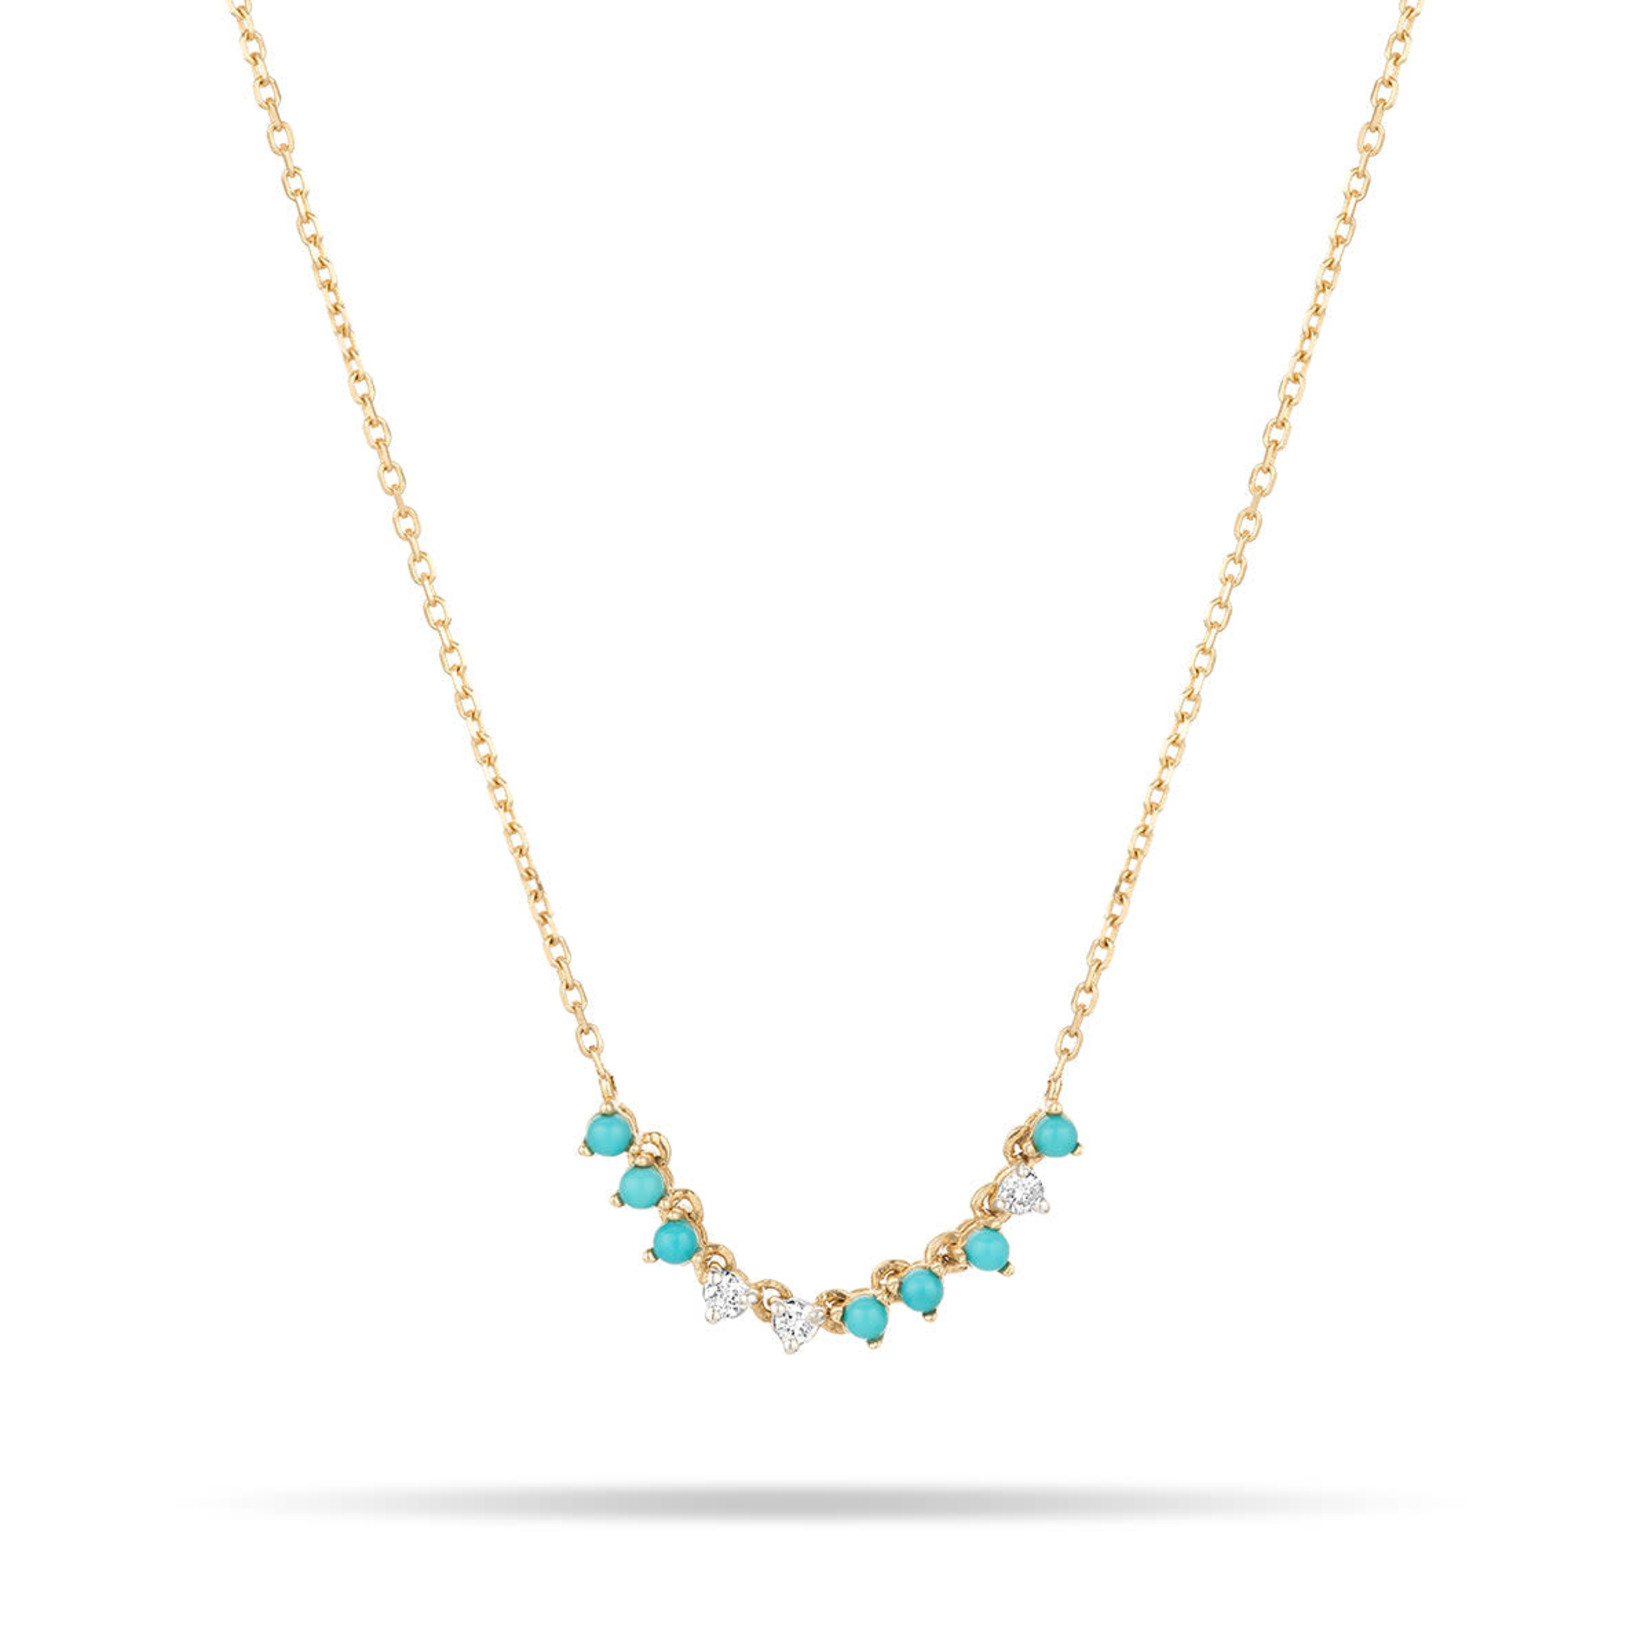 Diana + Turquoise Rounds Chain Necklace